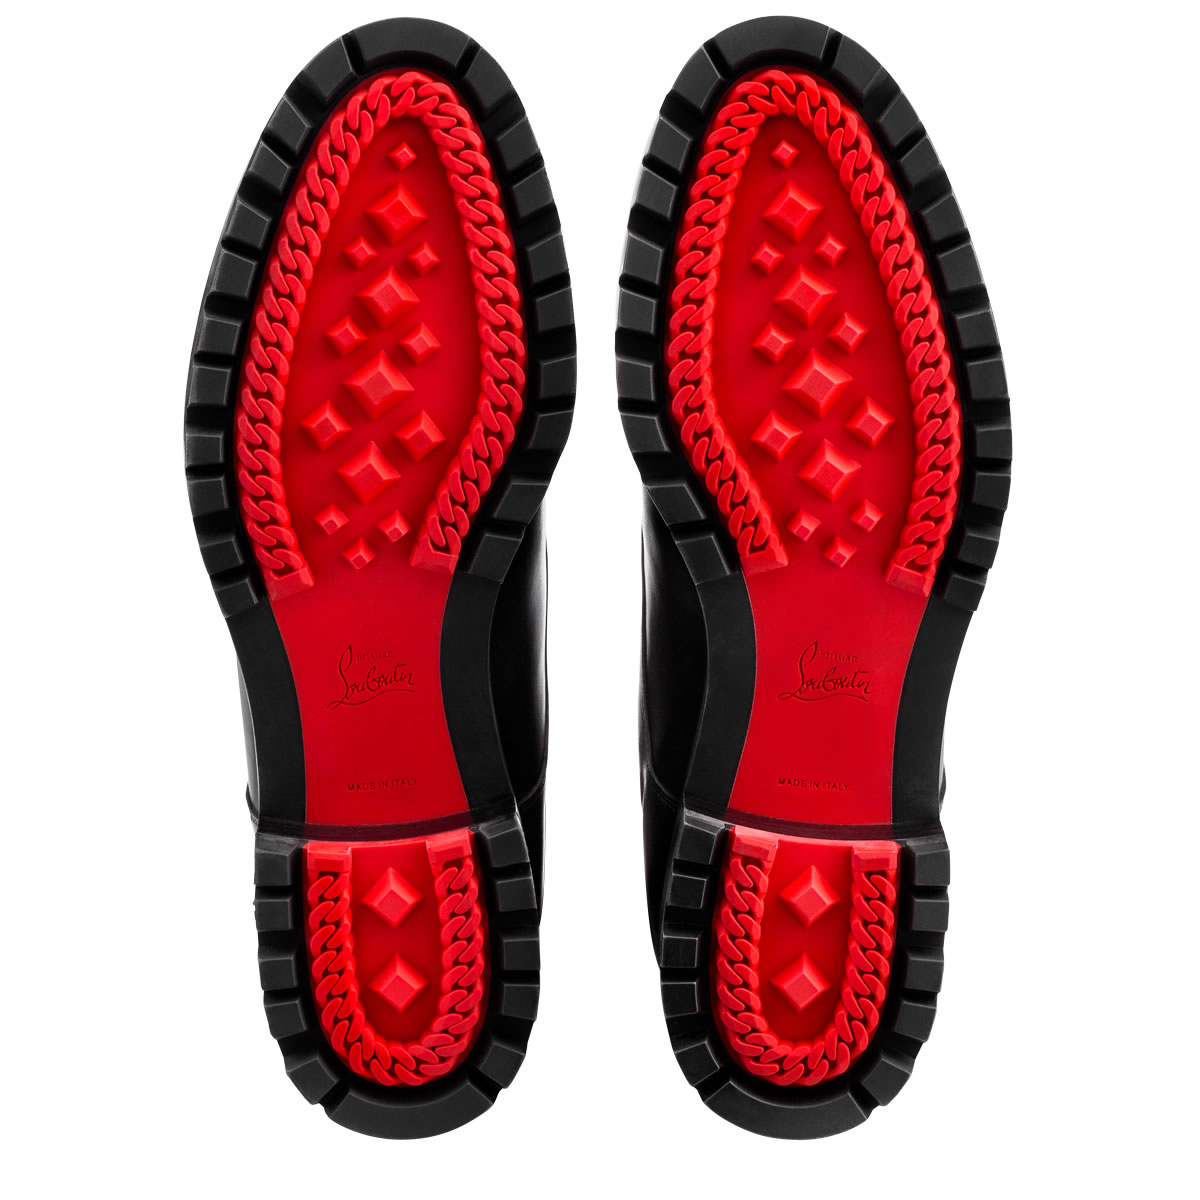 Red Bottoms Christian Louboutin Trapman Flat Boots (ON FOOT REVIEW